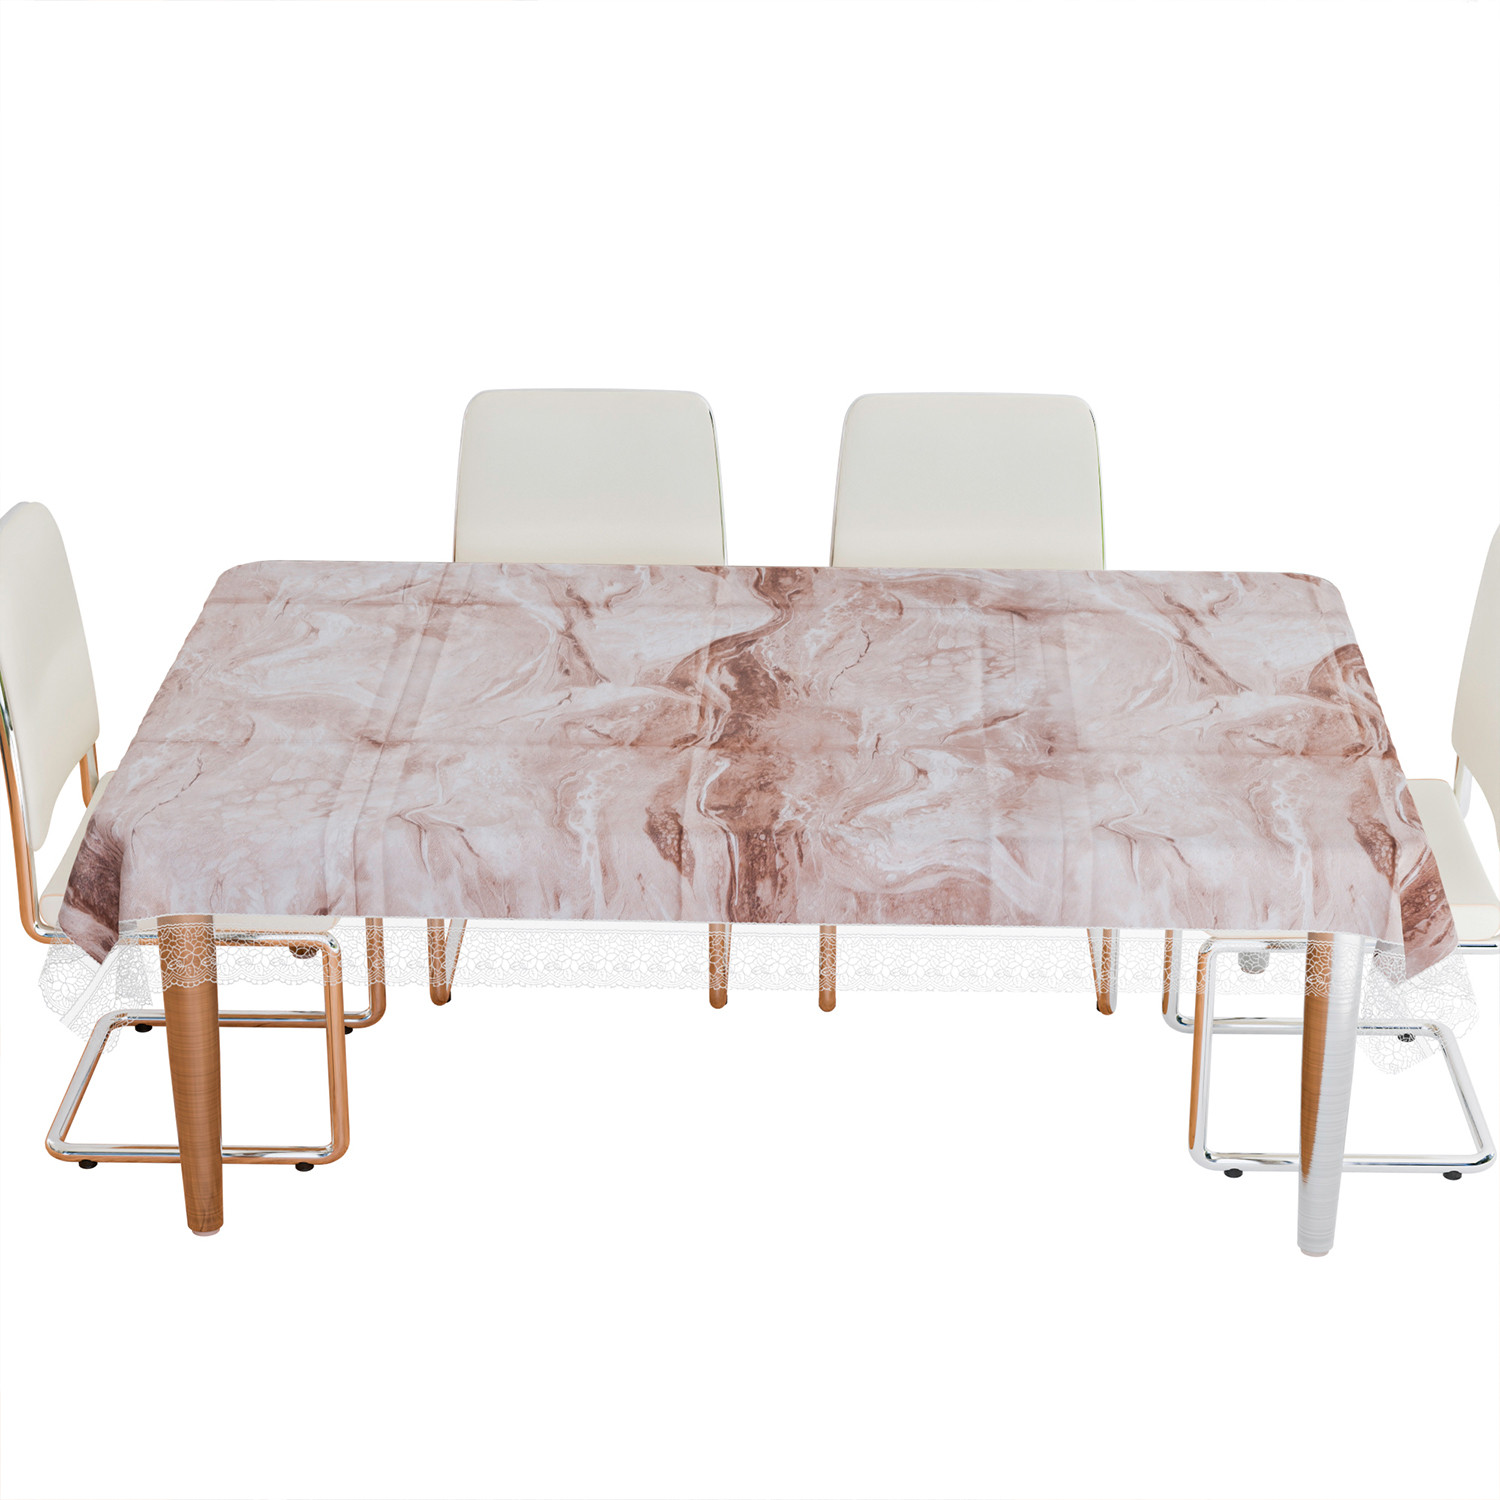 Kuber Industries Dining Table Cover | PVC Table Cloth Cover | 6 Seater Table Cloth | Marble Table Cover | Table Protector | Table Cover for Dining Table | 60x90 Inch | DTC | Brown